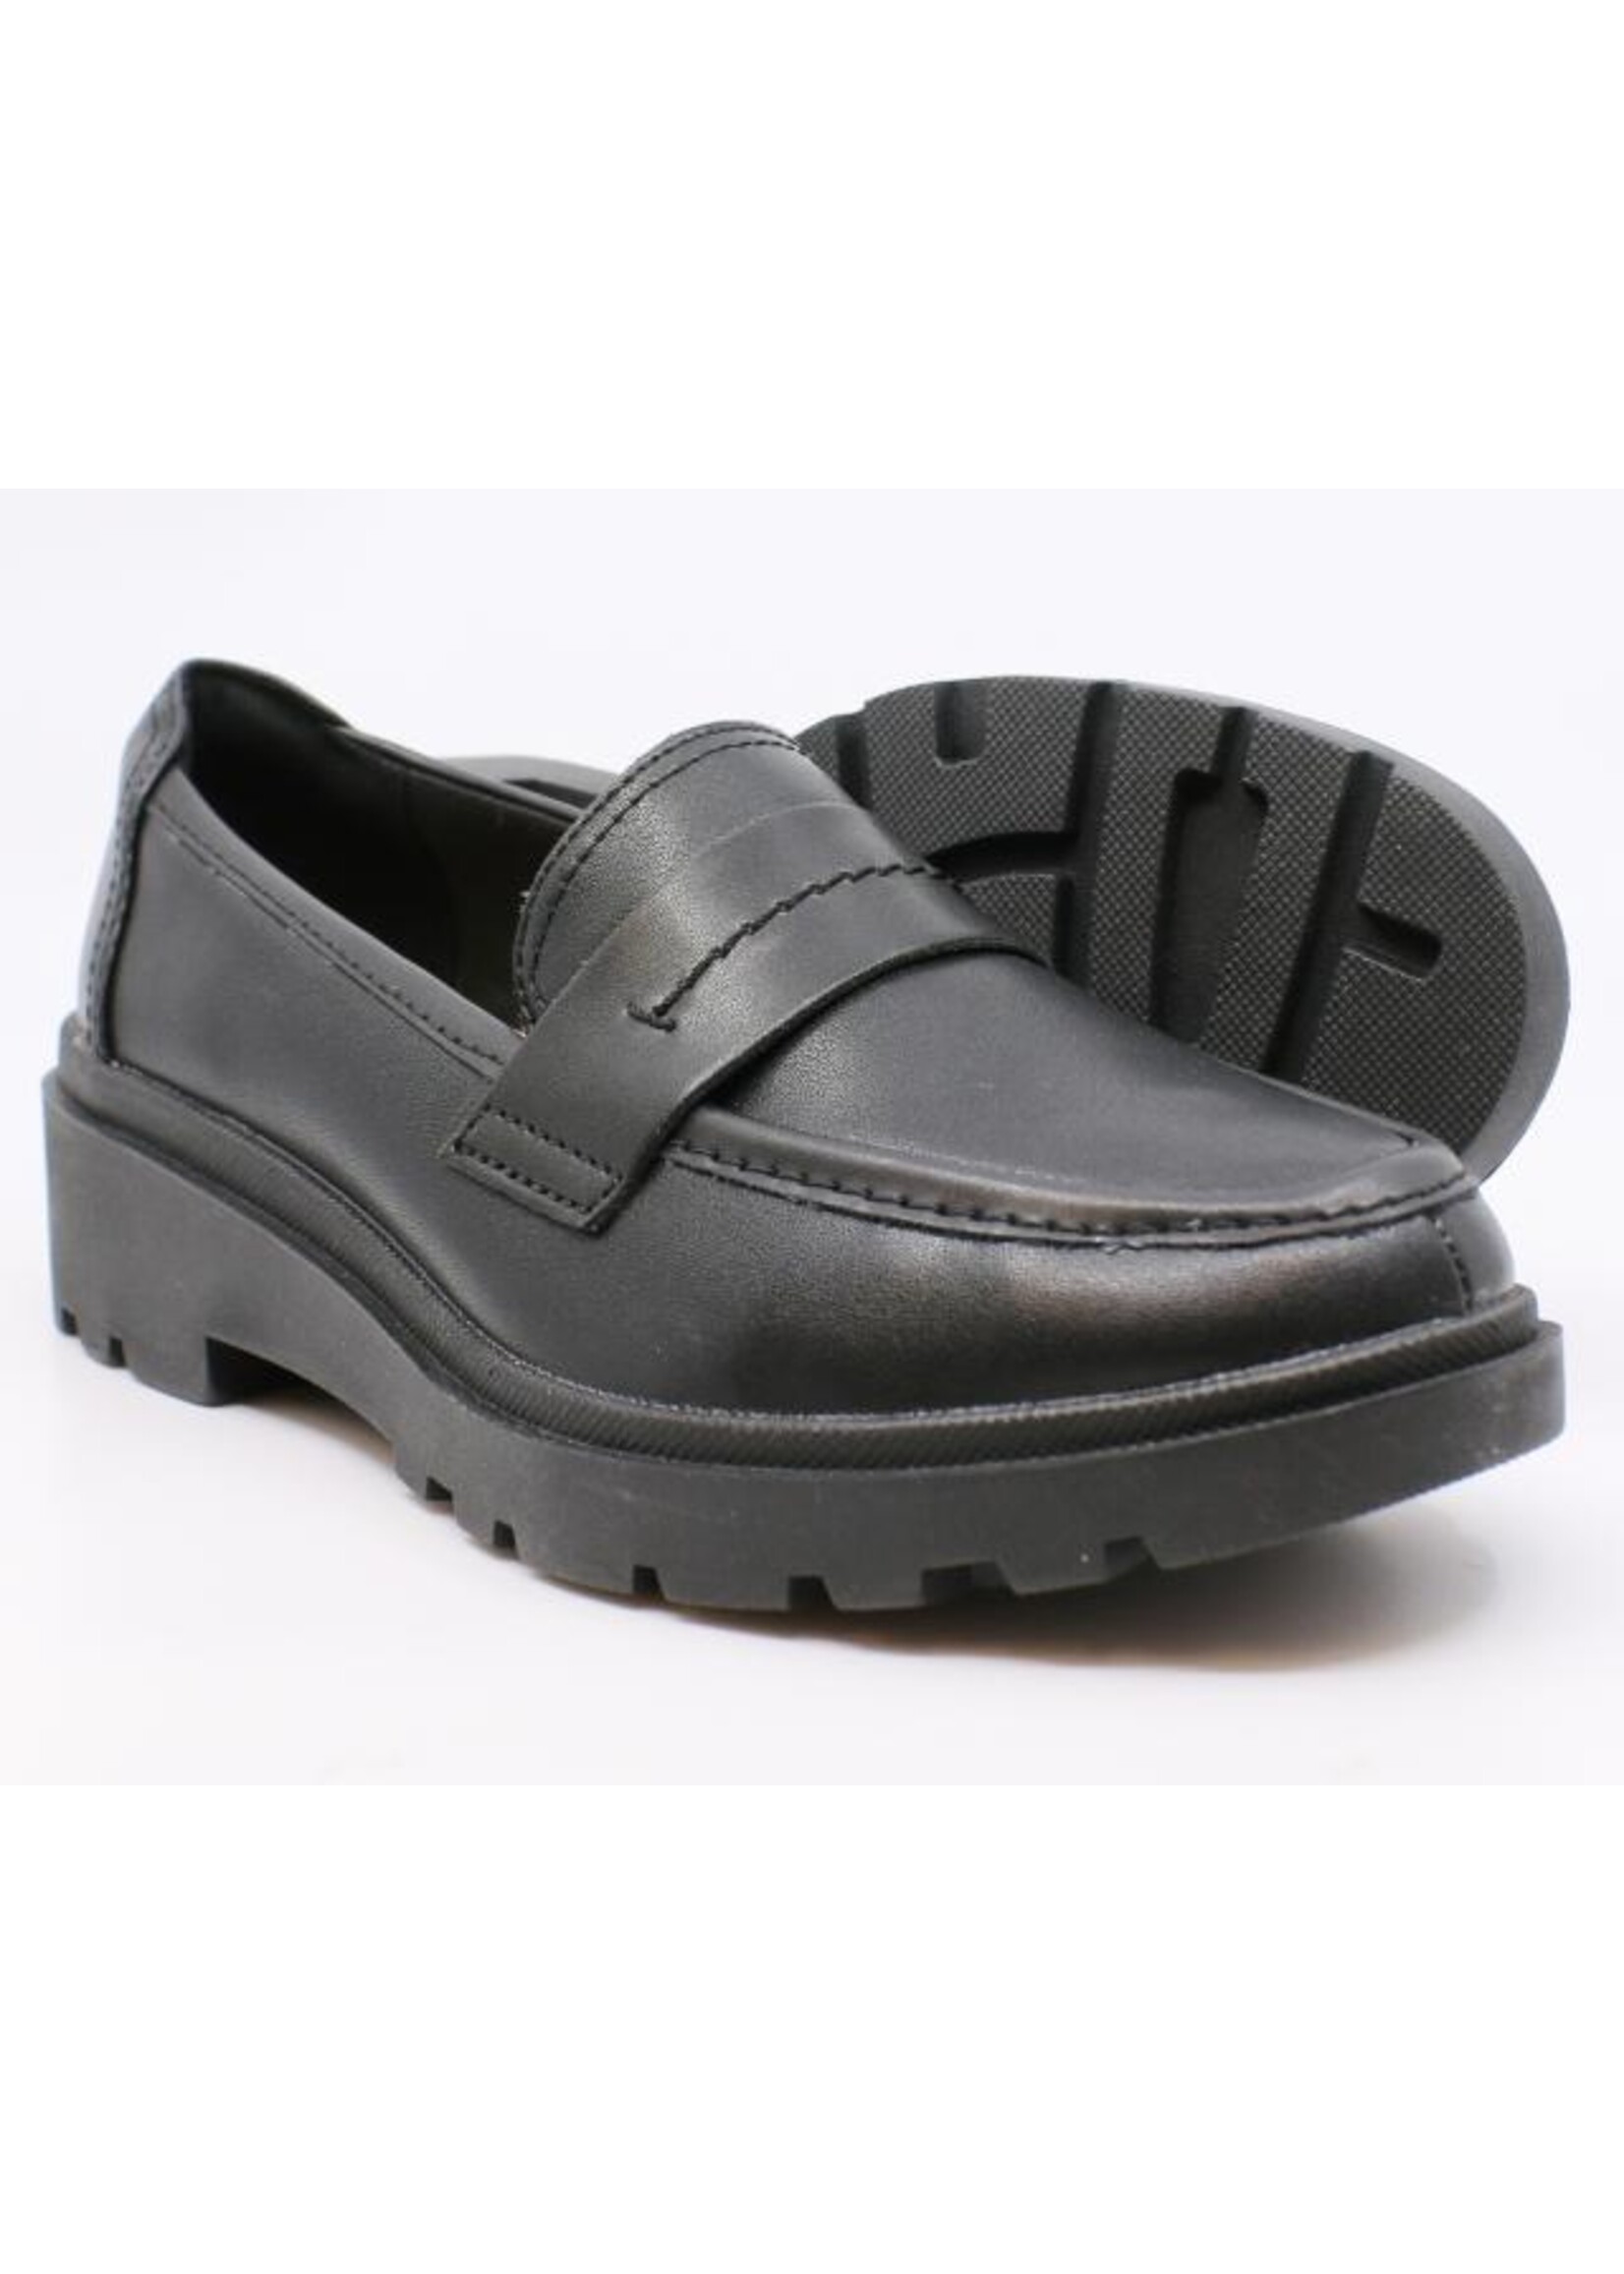 Ladies CLARK'S Calla Ease Loafer